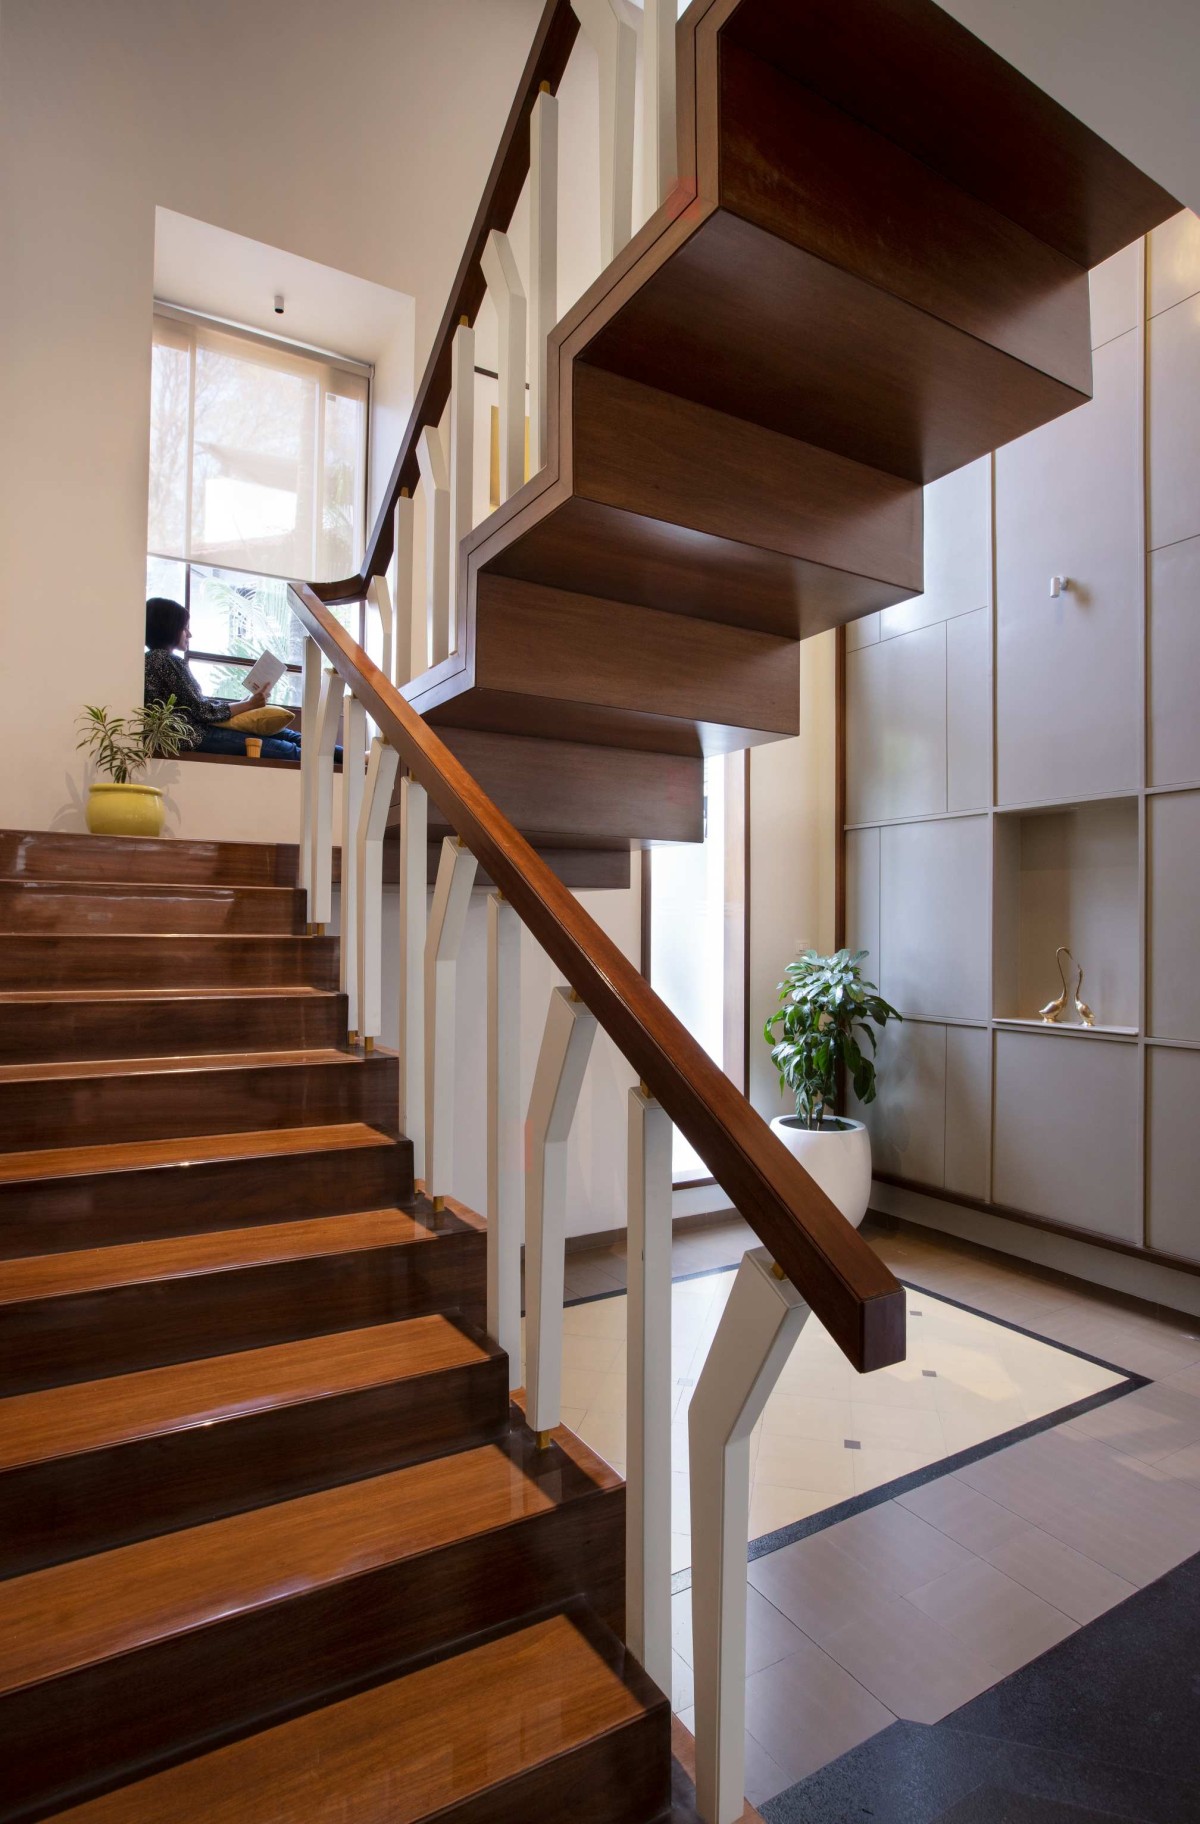 Staircase of Godbole Residence by Chaware & Associates